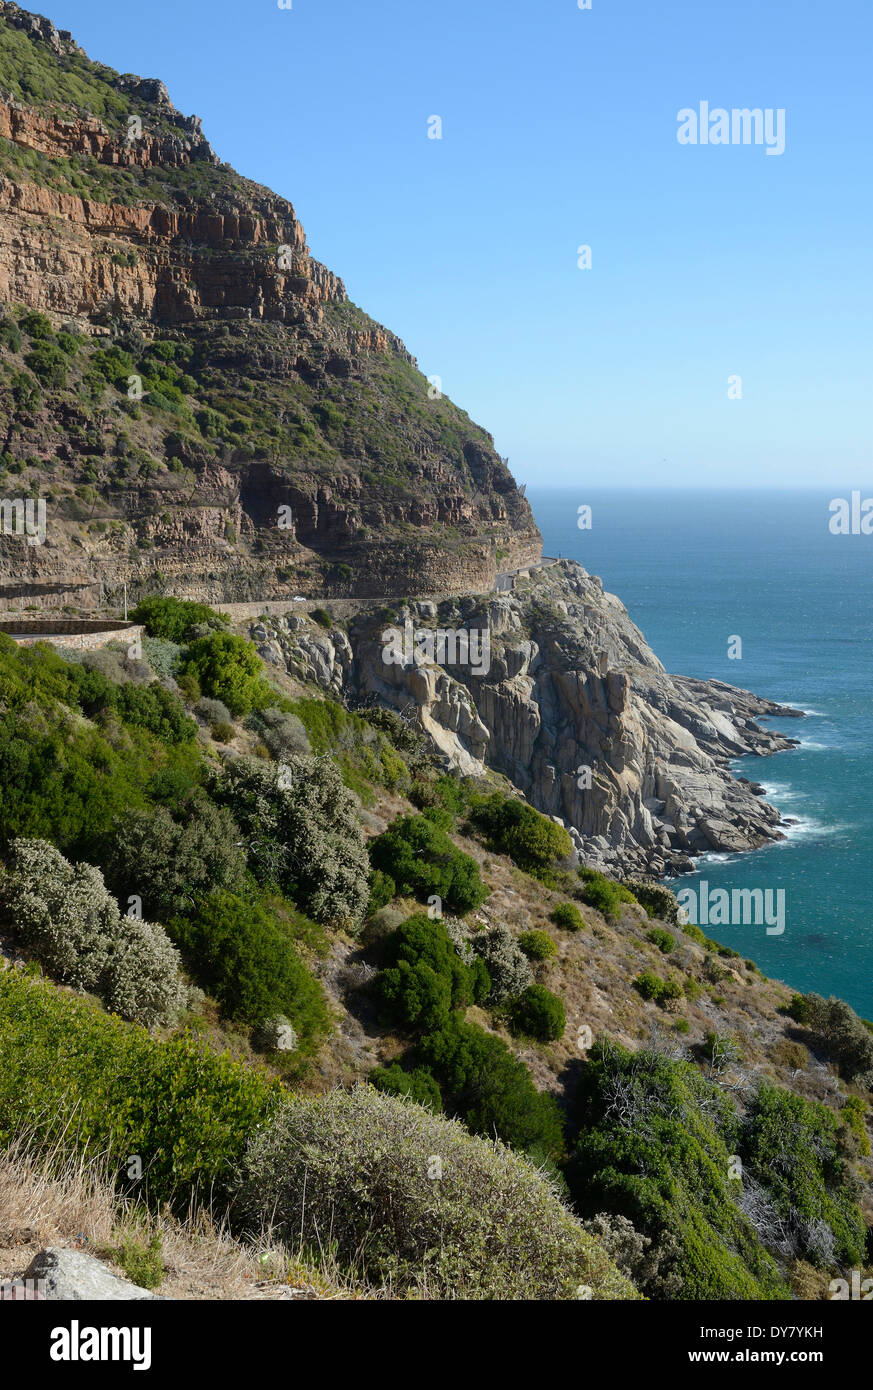 Cliffs with Chapman's Peak Drive, Cape Peninsula, Western Cape, South Africa Stock Photo